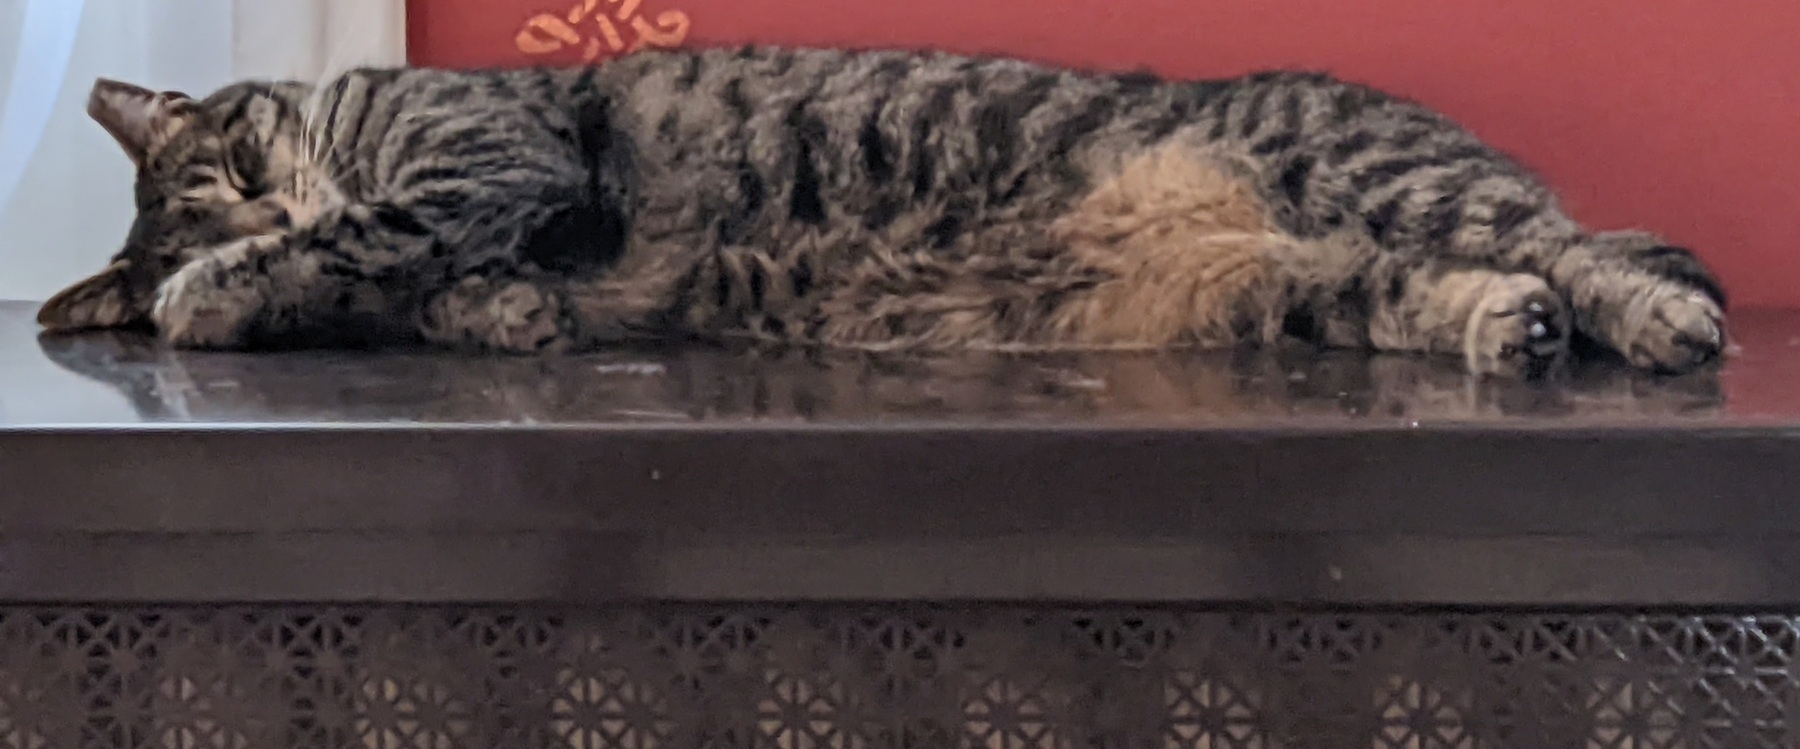 a large striped cat sleeps on his side, on top of a radiator cover